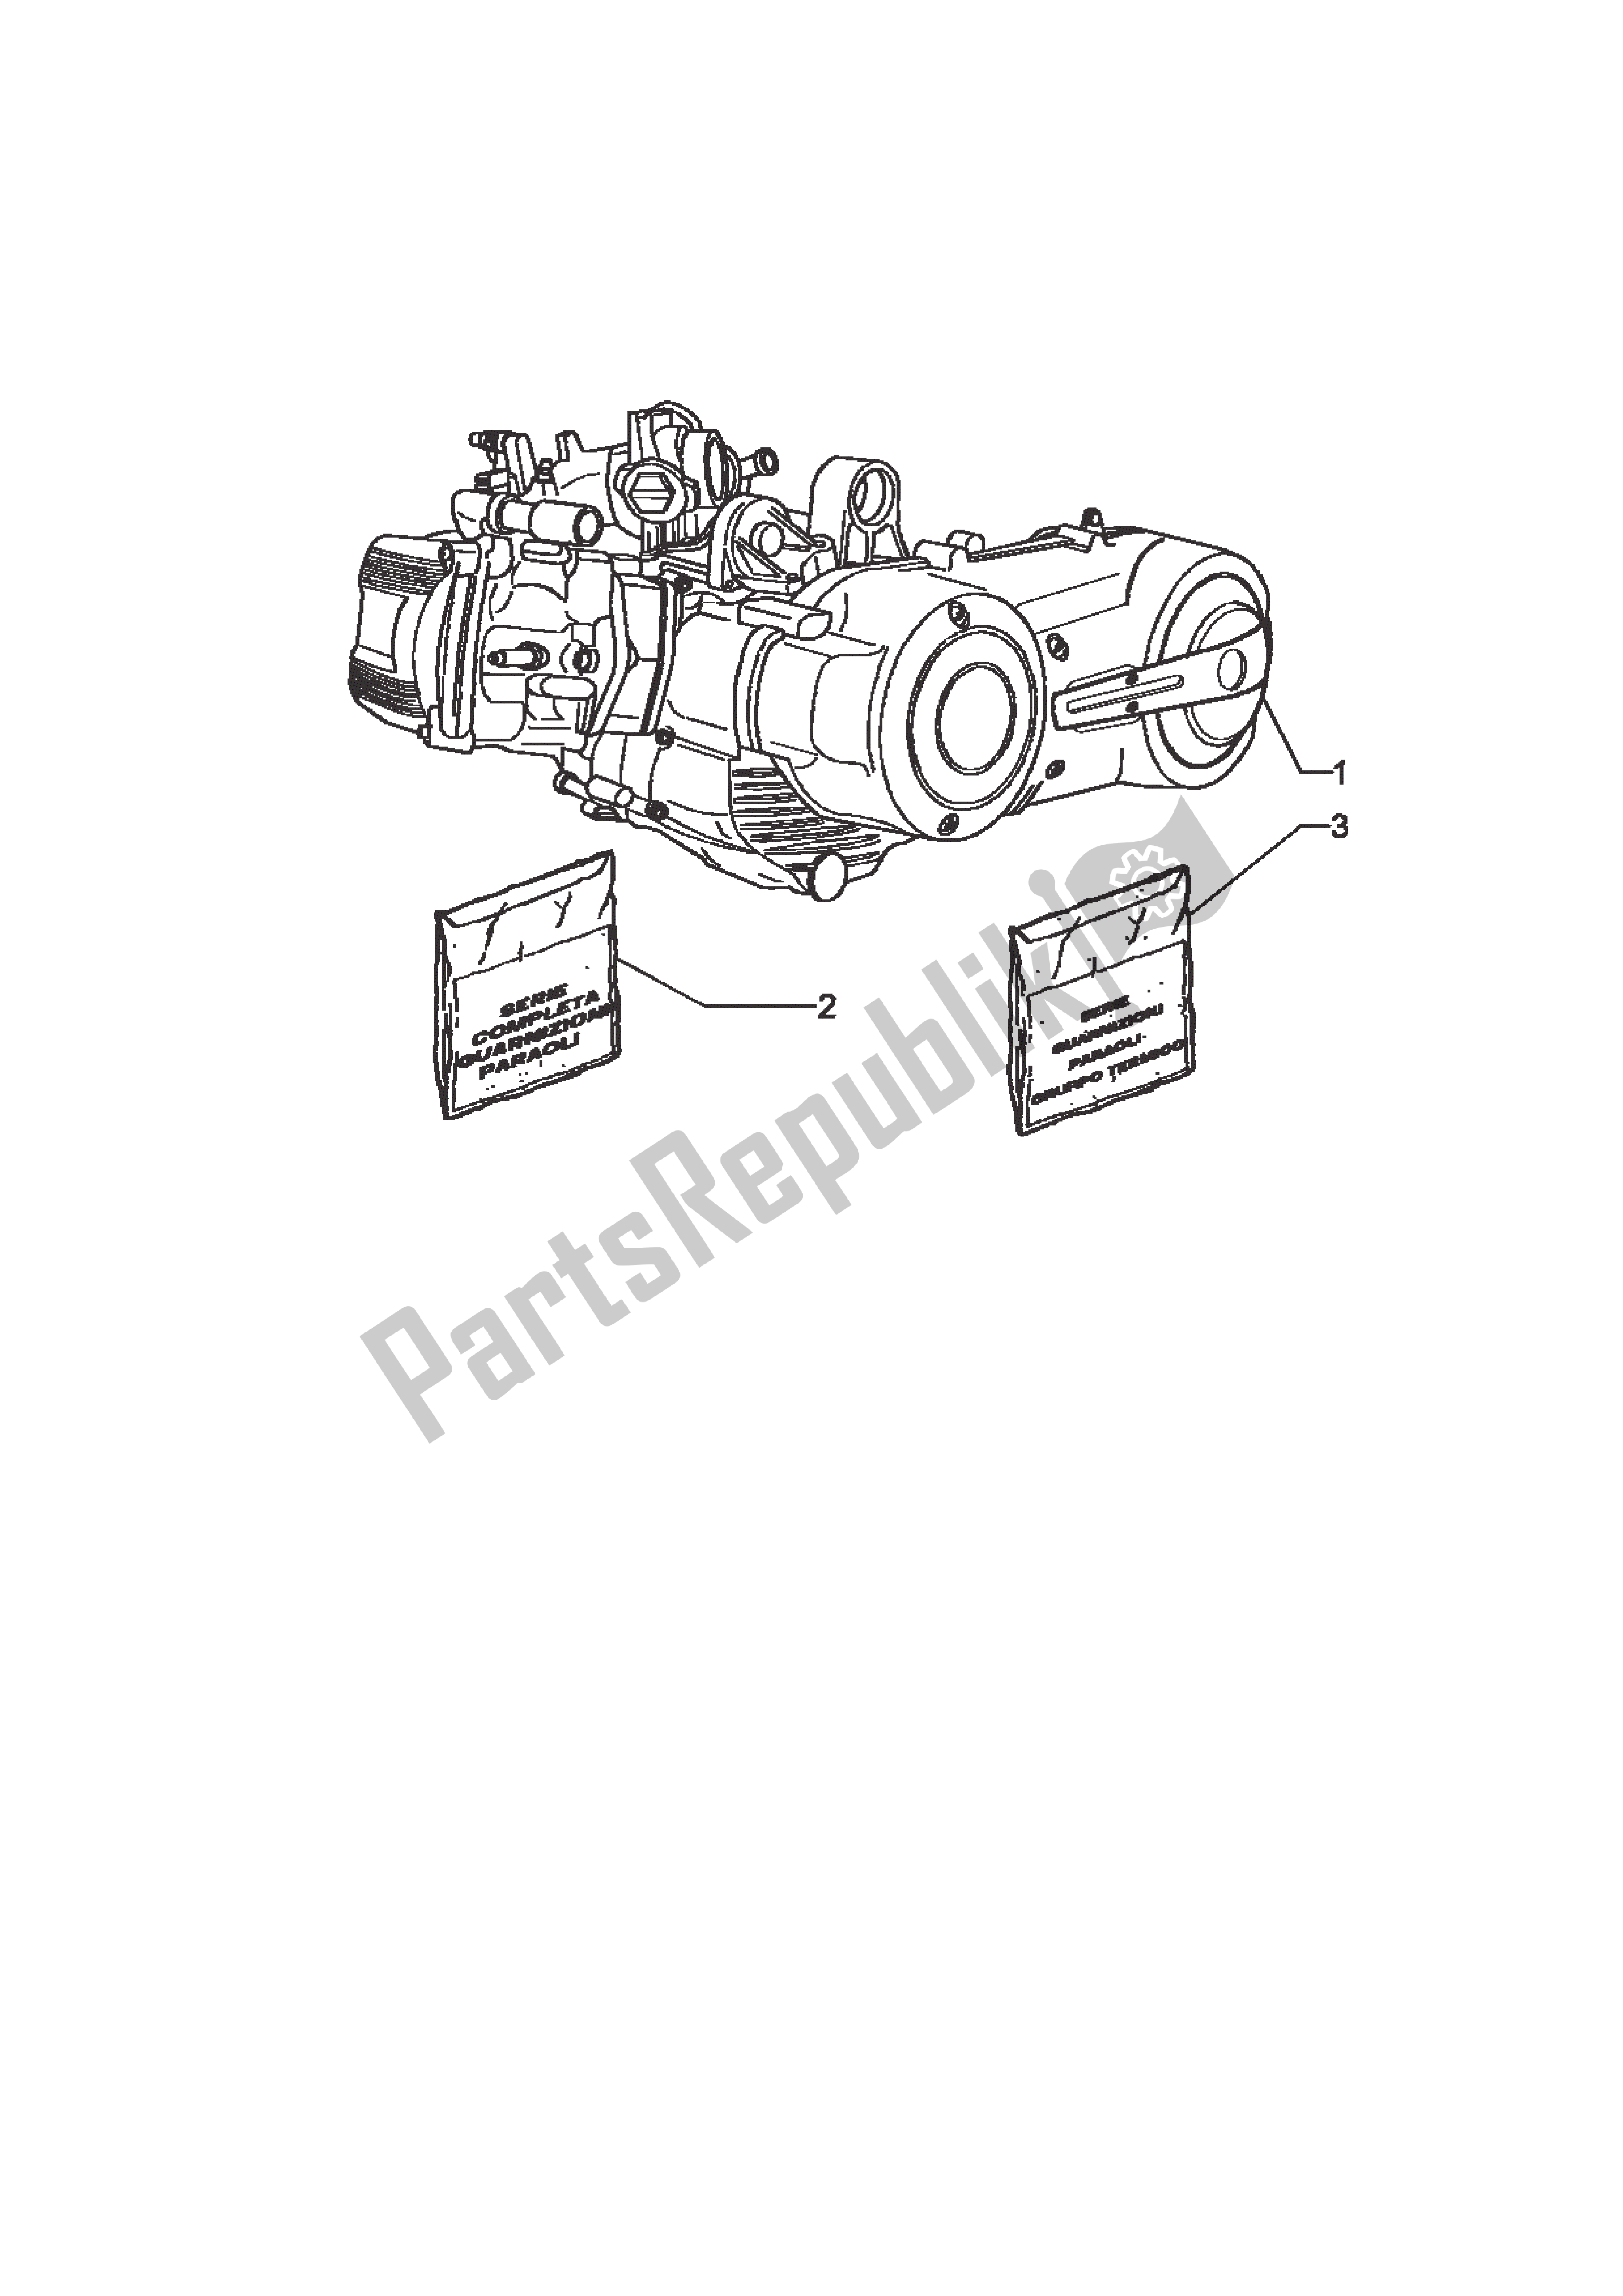 All parts for the Engine of the Piaggio X9 500 2003 - 2004